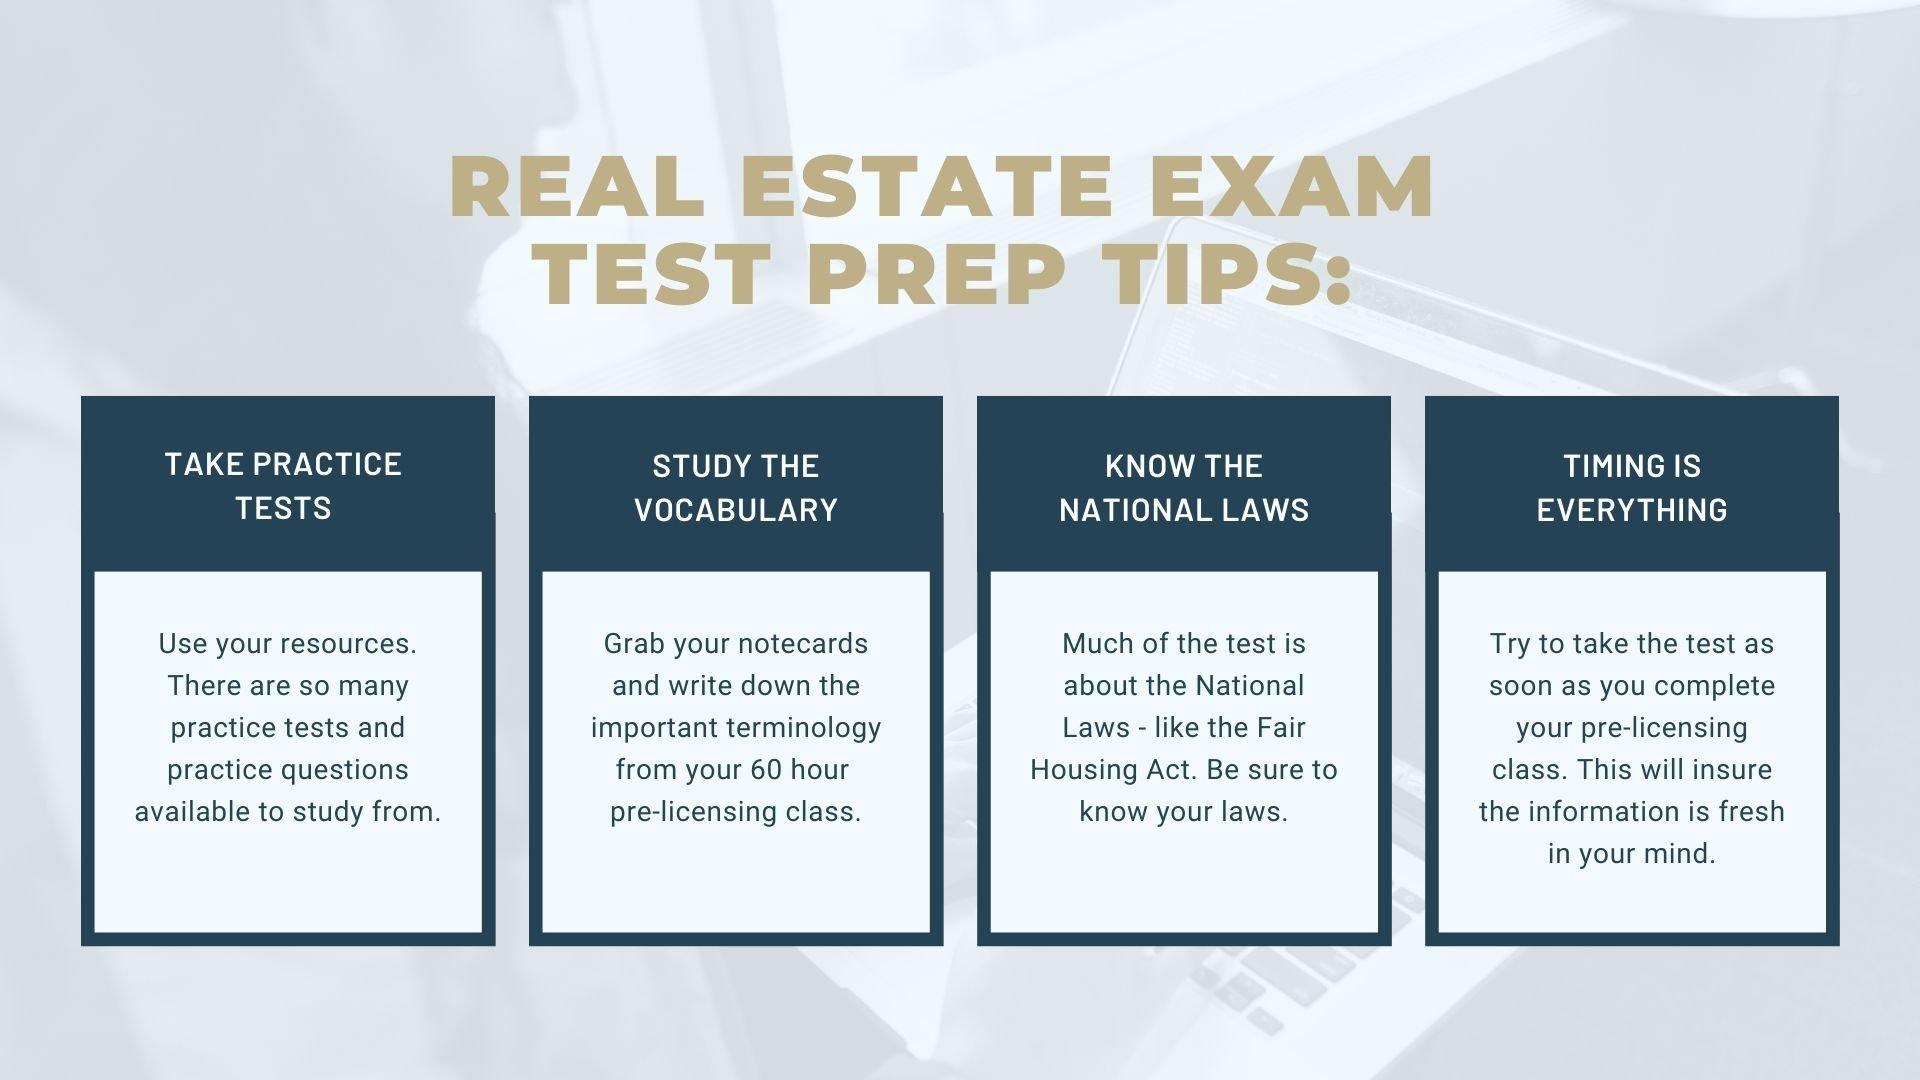 How much does it cost to take the real estate exam